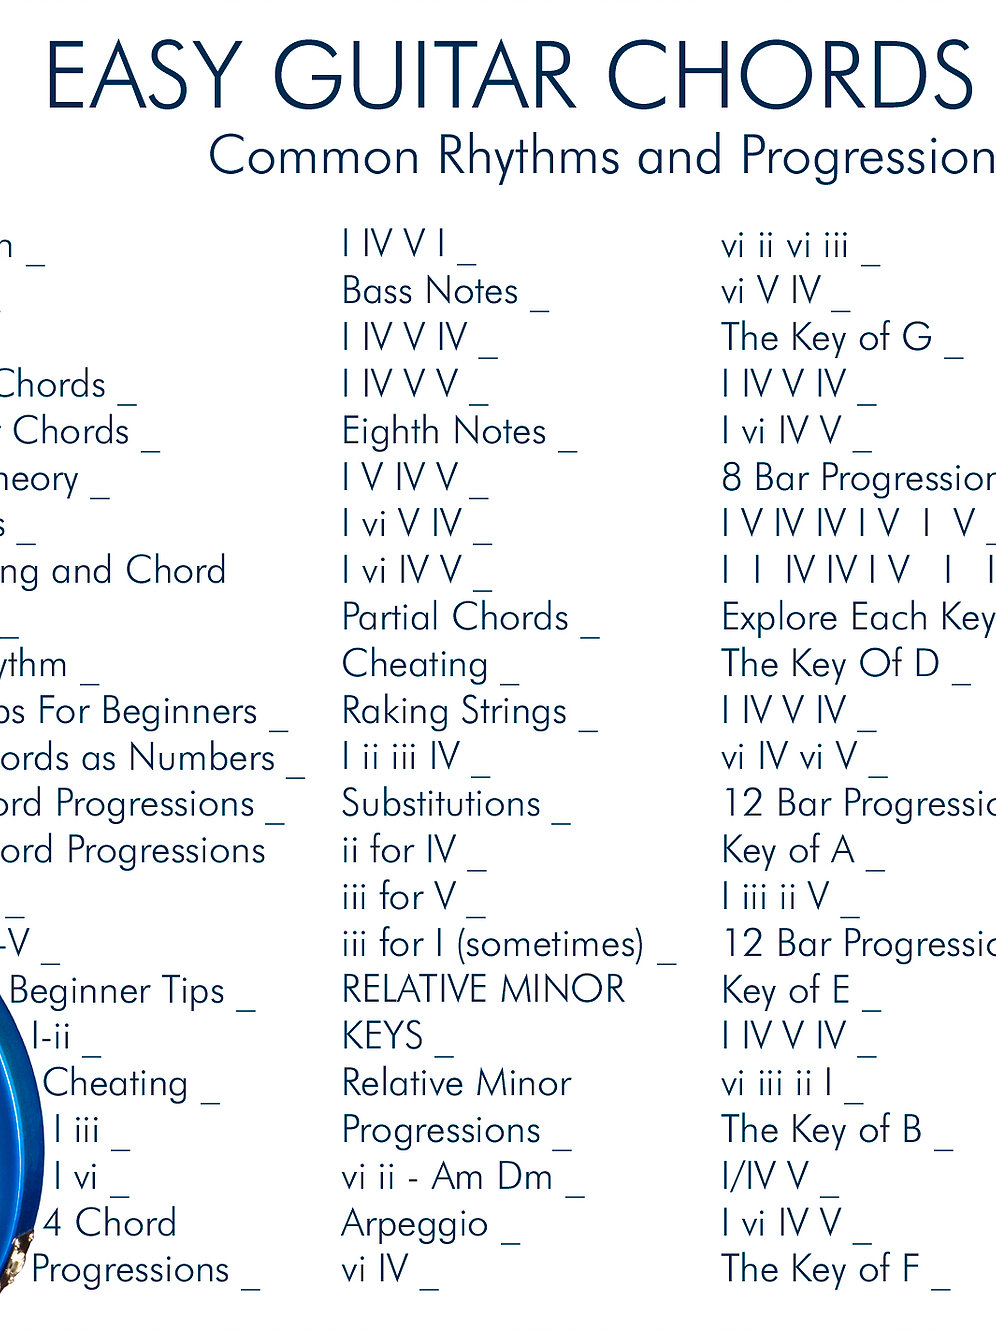 Easy Guitar Chords Easy Guitar Chords Common Rhythms And Progressions